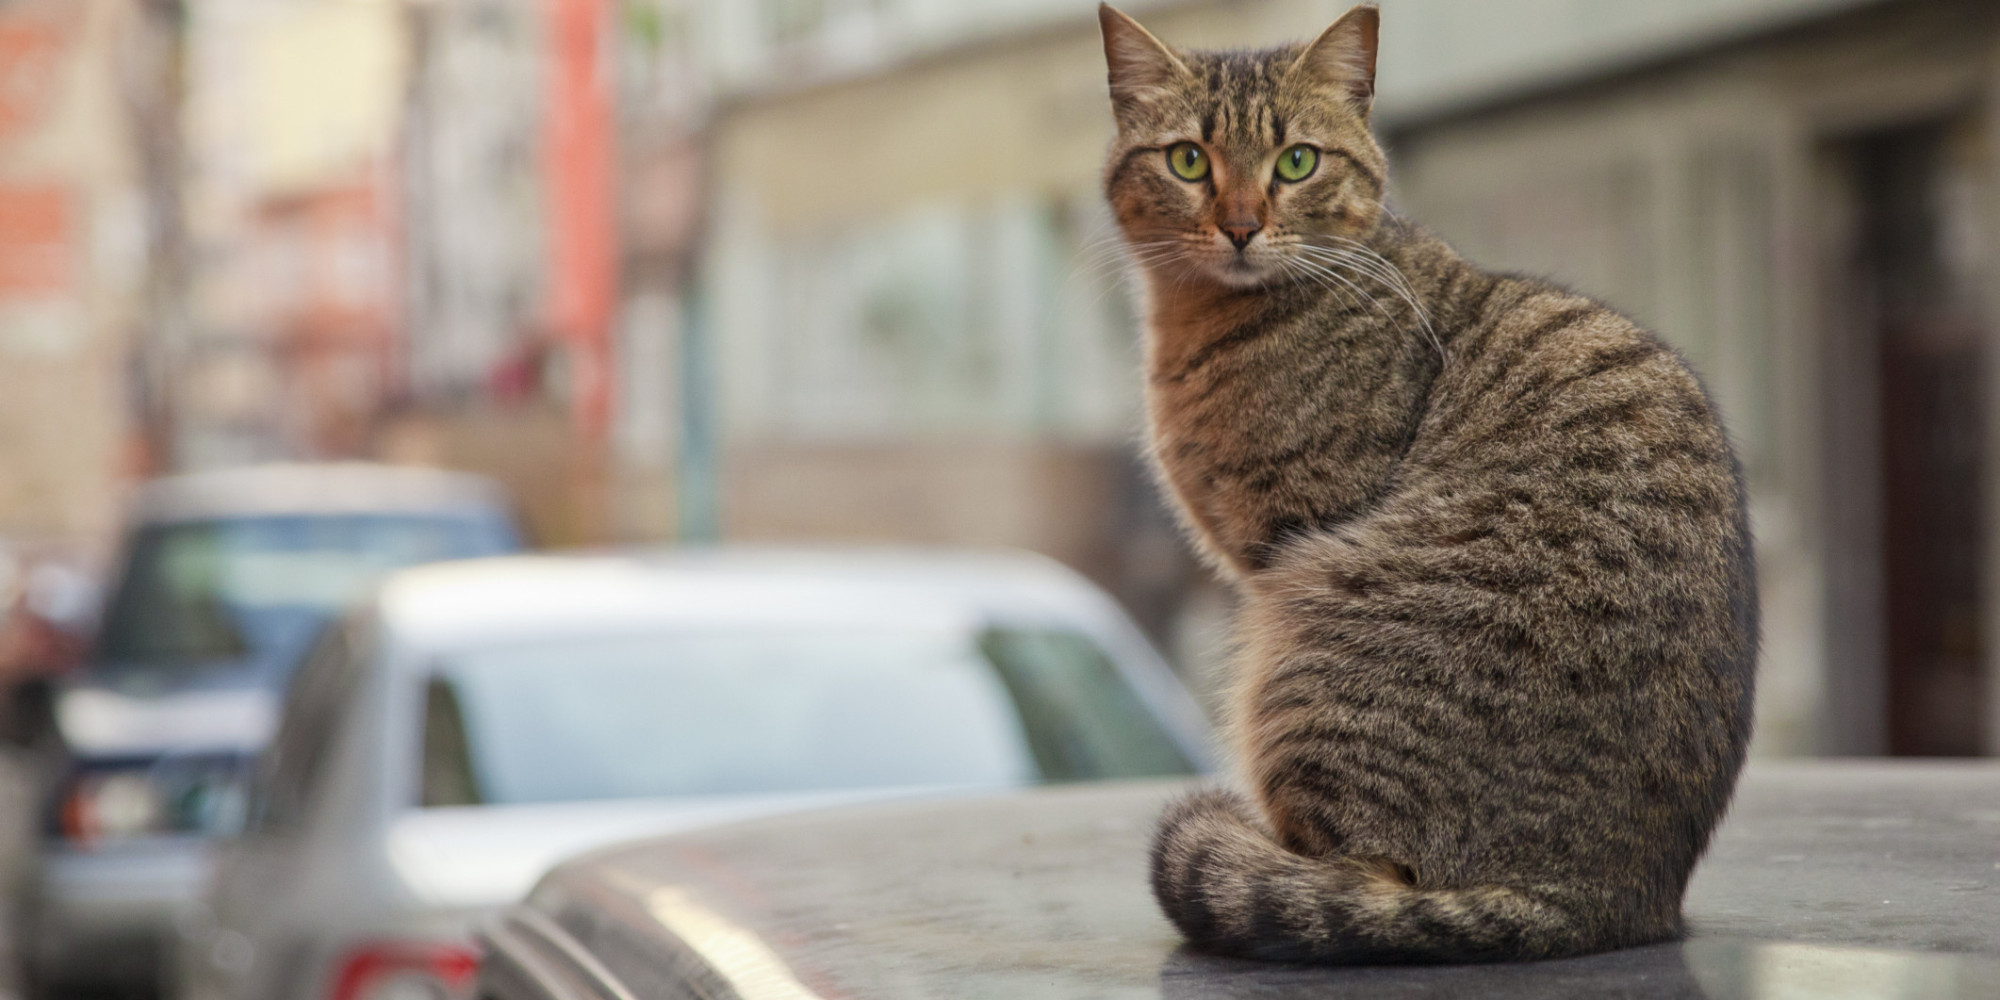 The Ultimate "City of Cats" (PHOTOS) Kevin Richberg